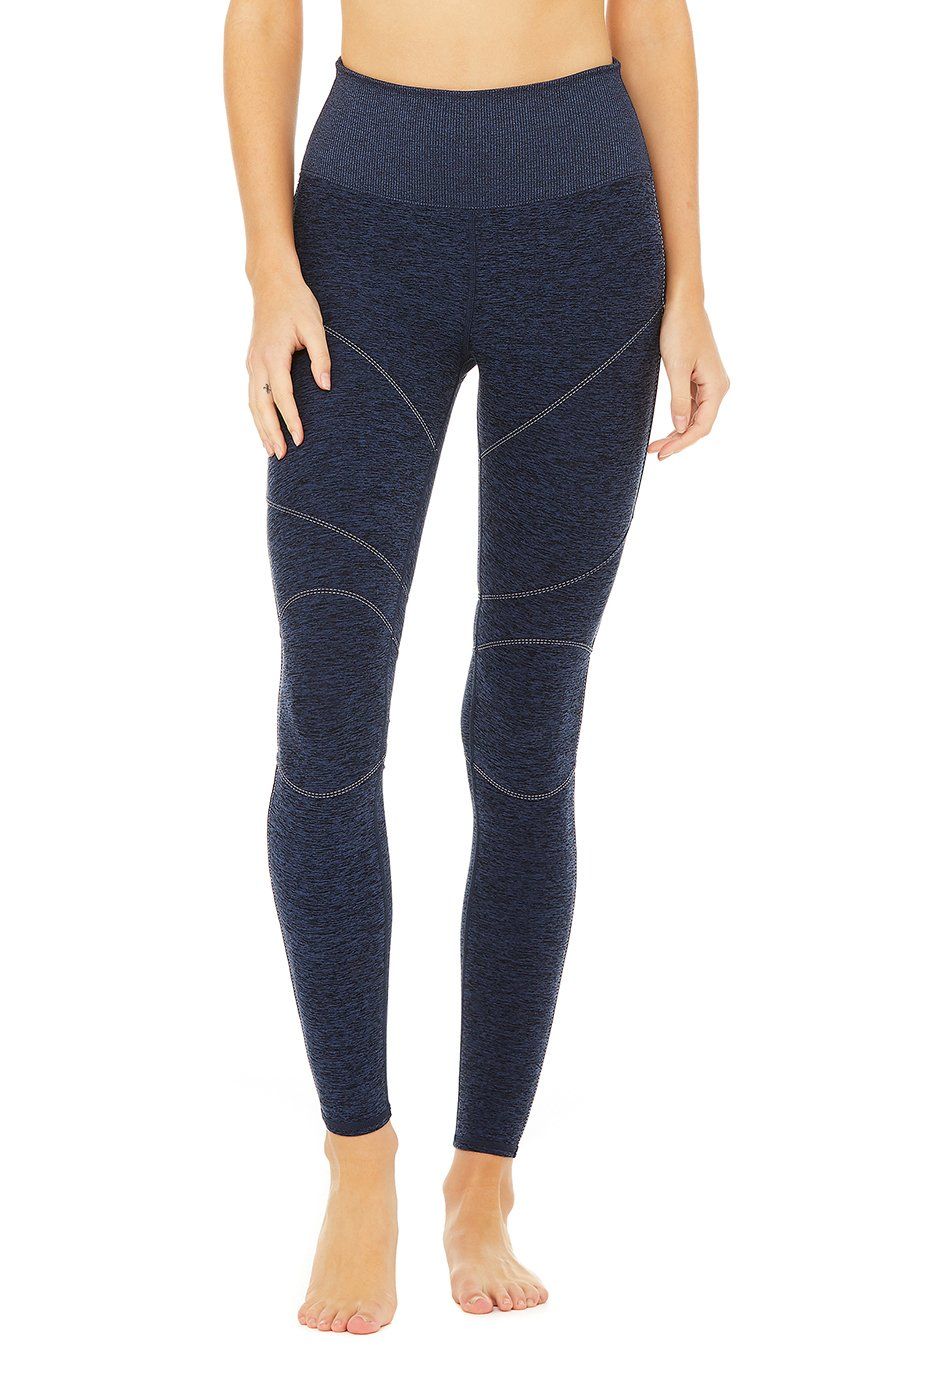 Blue High-Rise Leggings by Alo on Sale